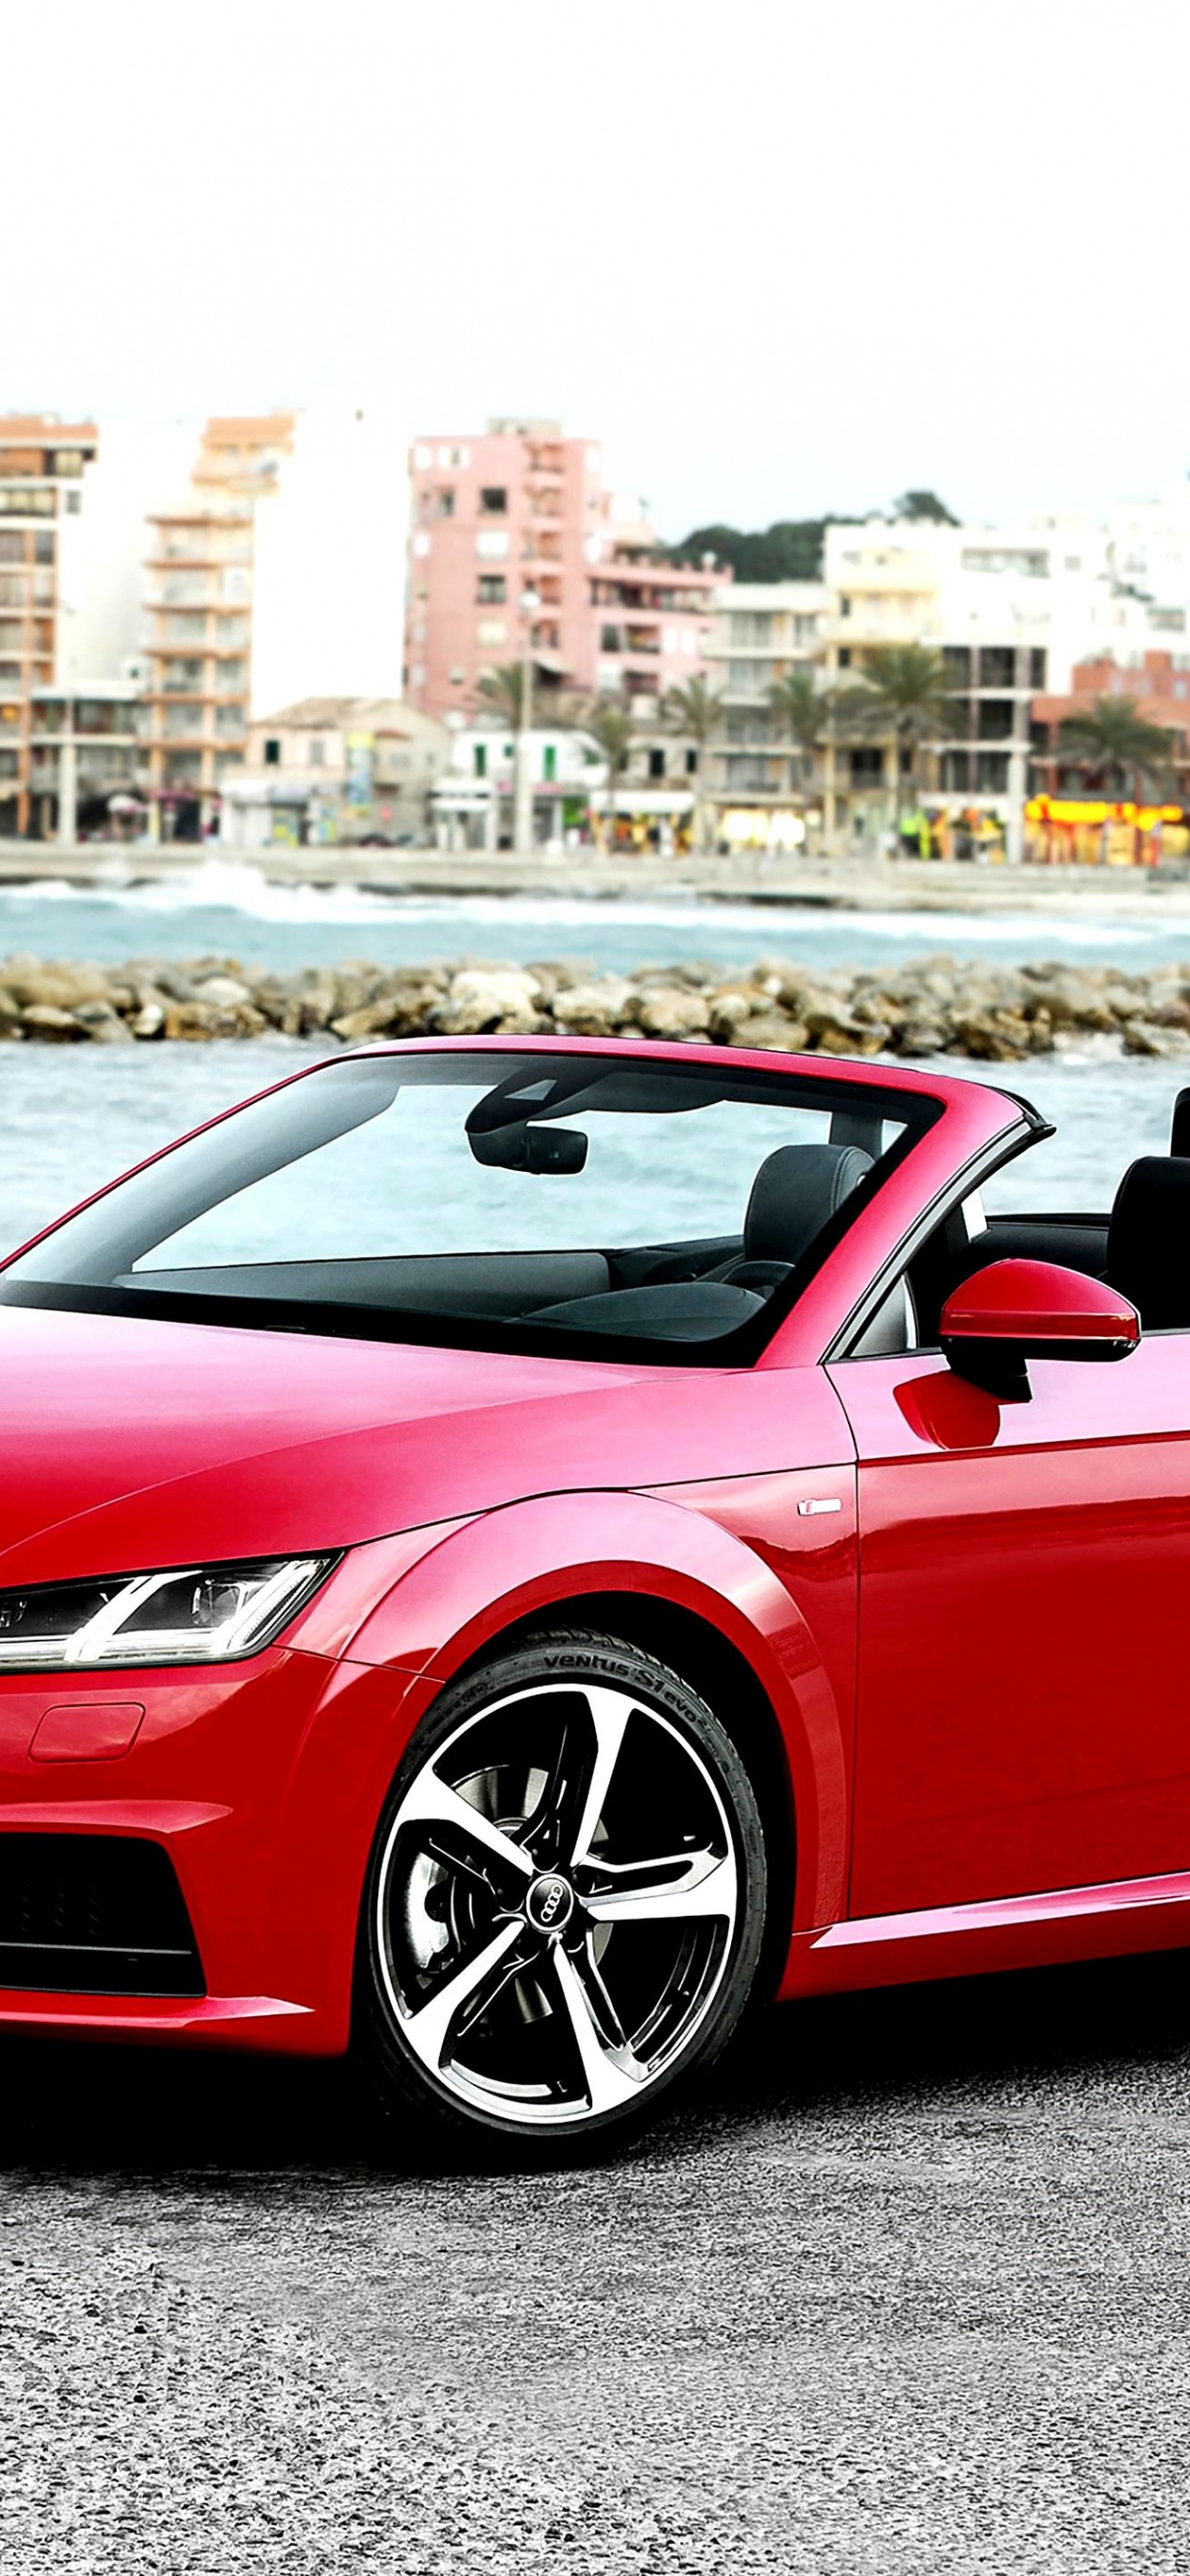 Red Convertible Car Parked Near Body of Water During Daytime. Wallpaper in 1242x2688 Resolution